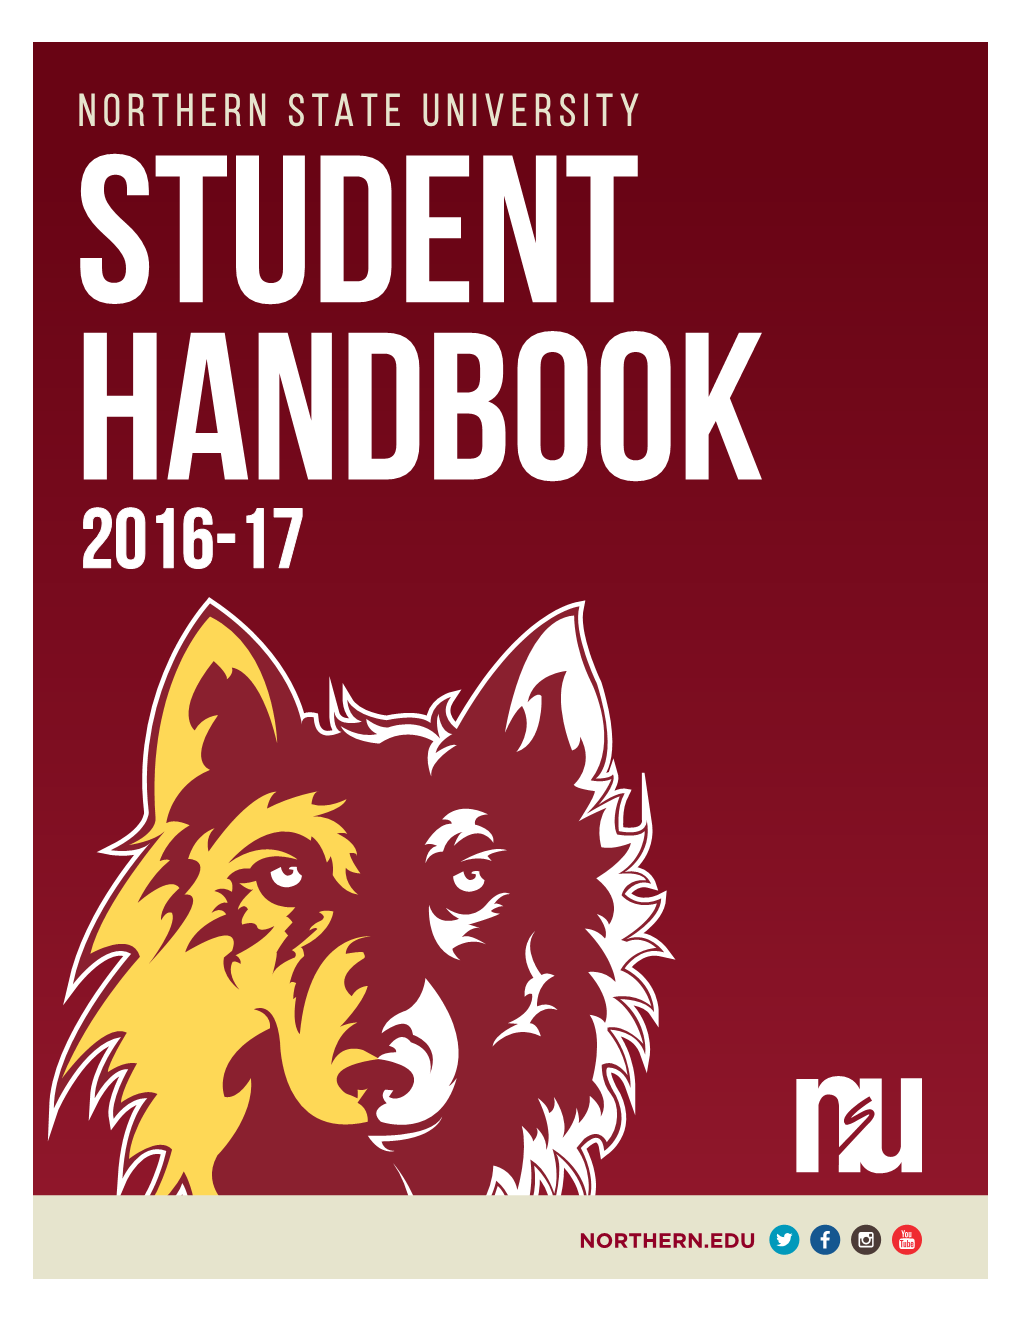 Northern State University. This Handbook Has Been Developed for Your Use by the Student Affairs Office